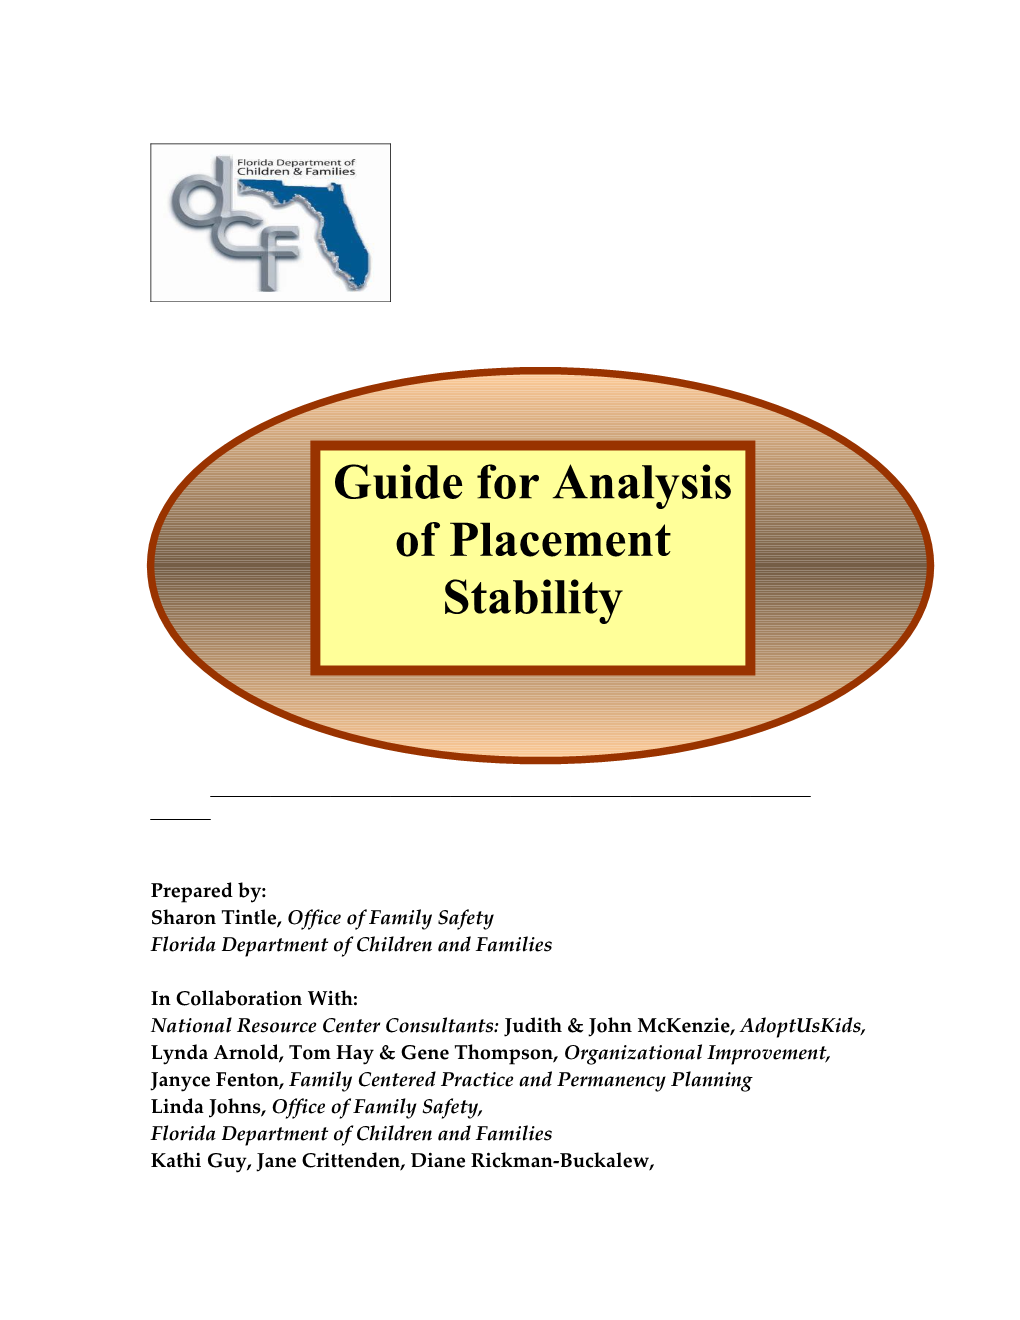 Placement Stability and Data Analysis Project Guide